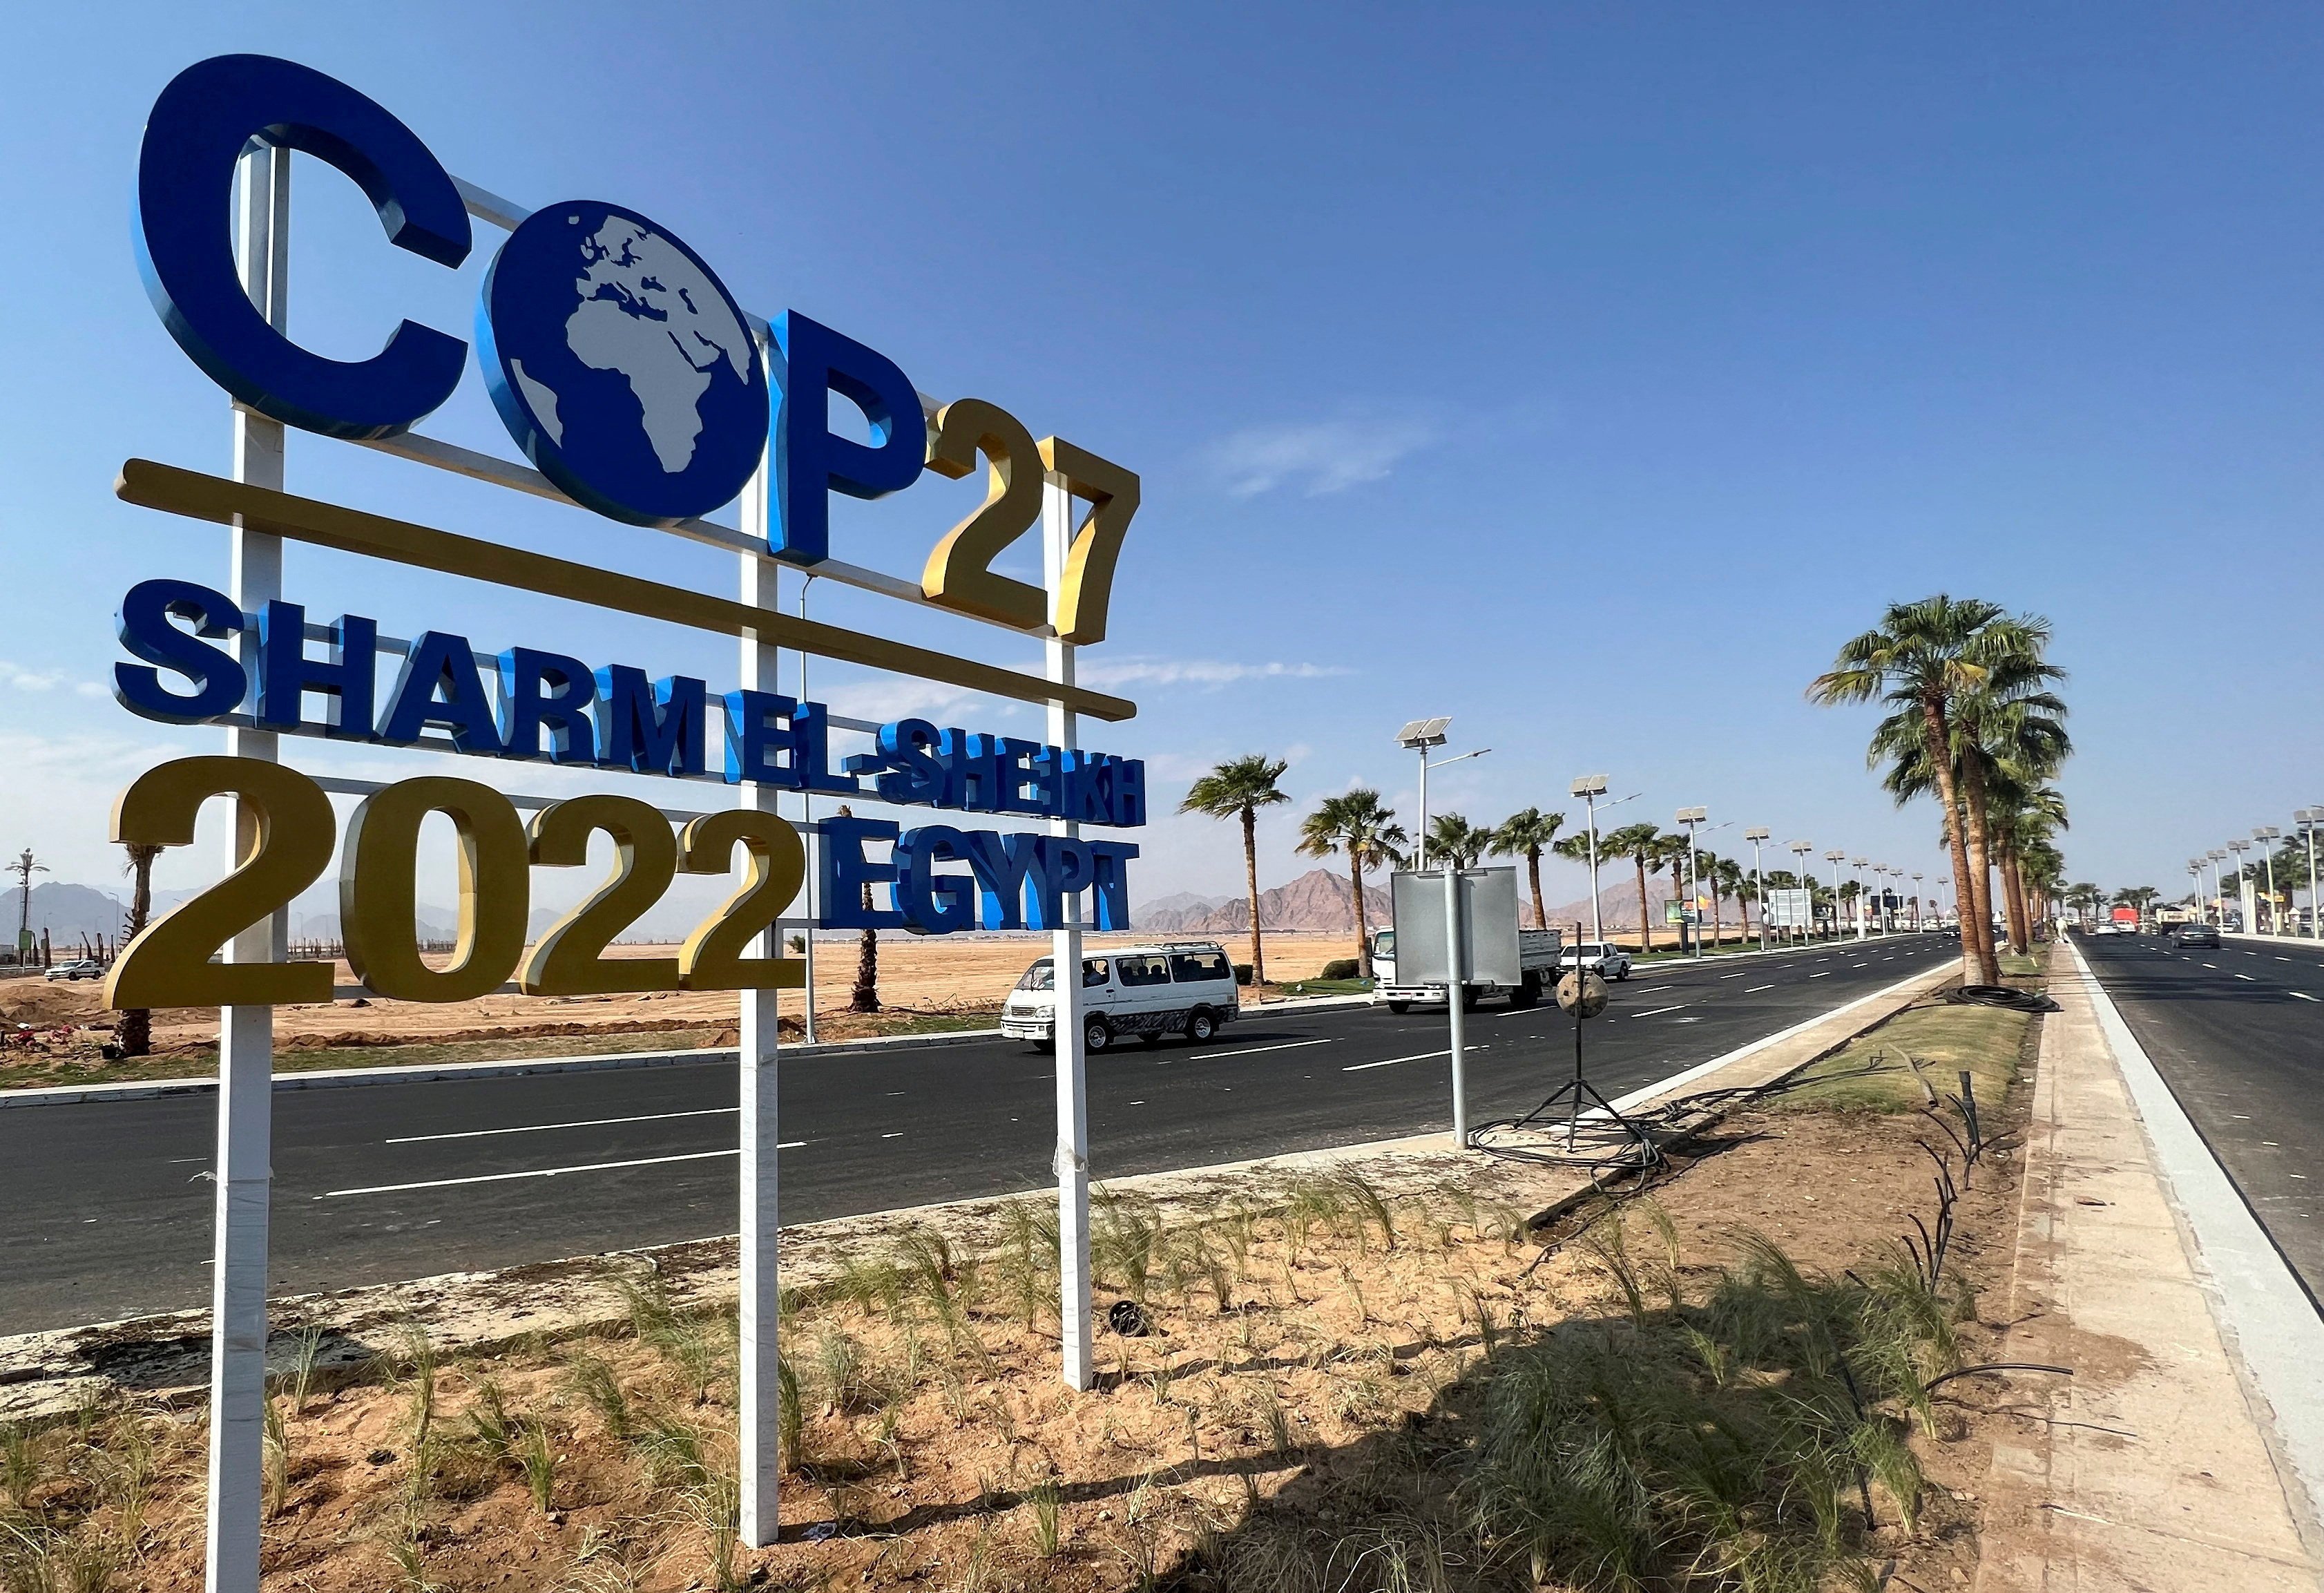 A COP27 sign on a road in Egypt’s Sharm el-Sheikh, this year’s host city, on October 20. Photo: Reuters